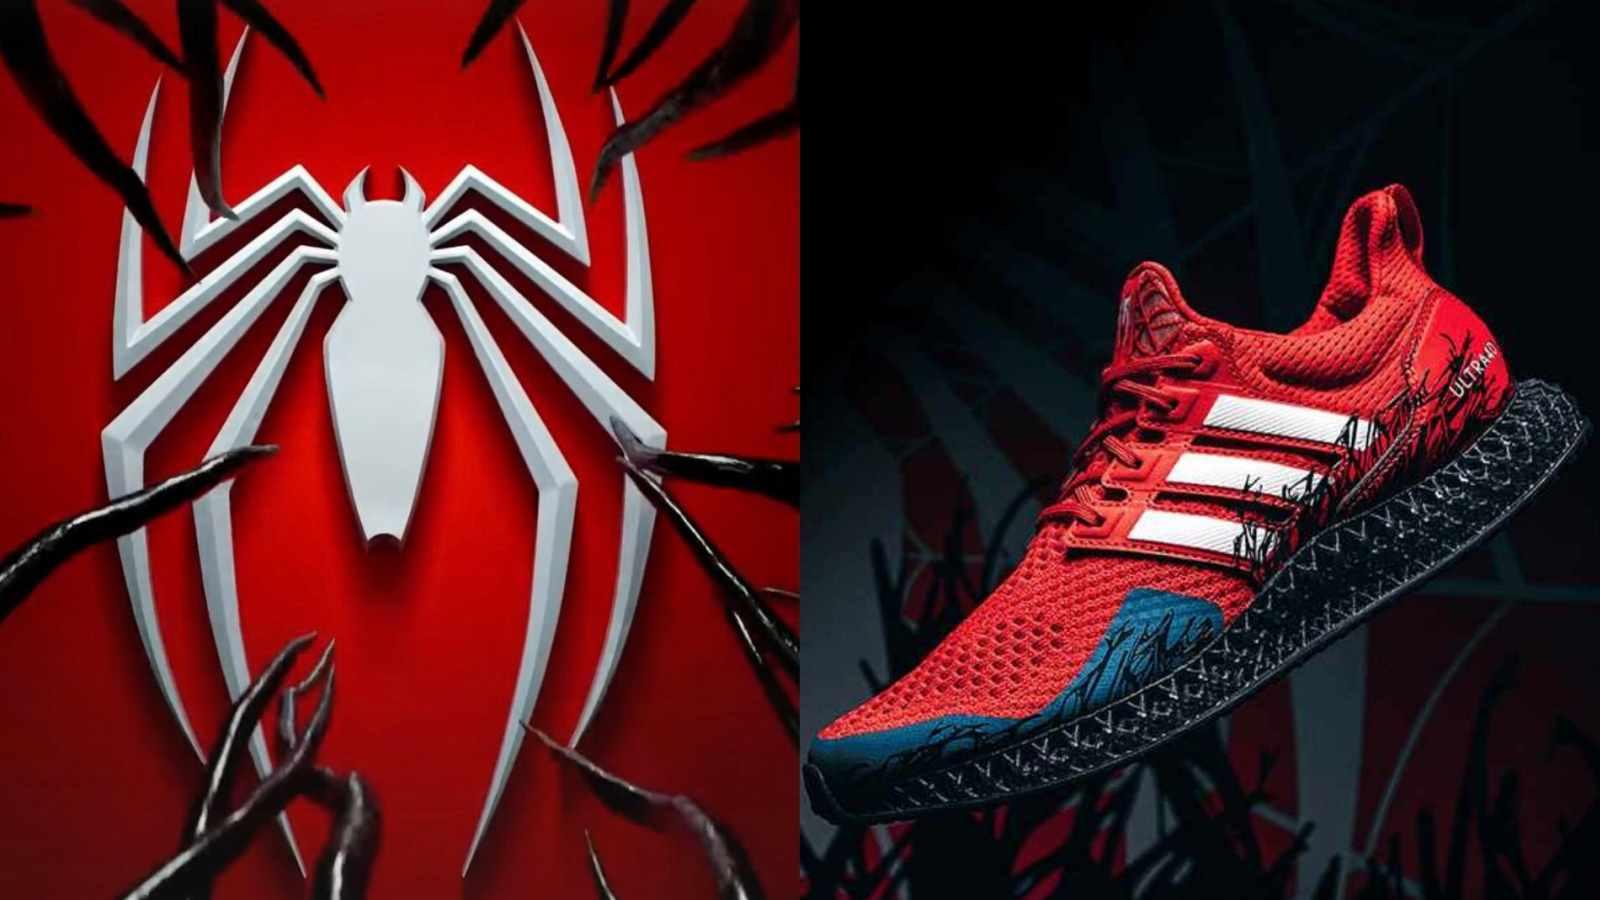 Spider-Man Adidas shoes